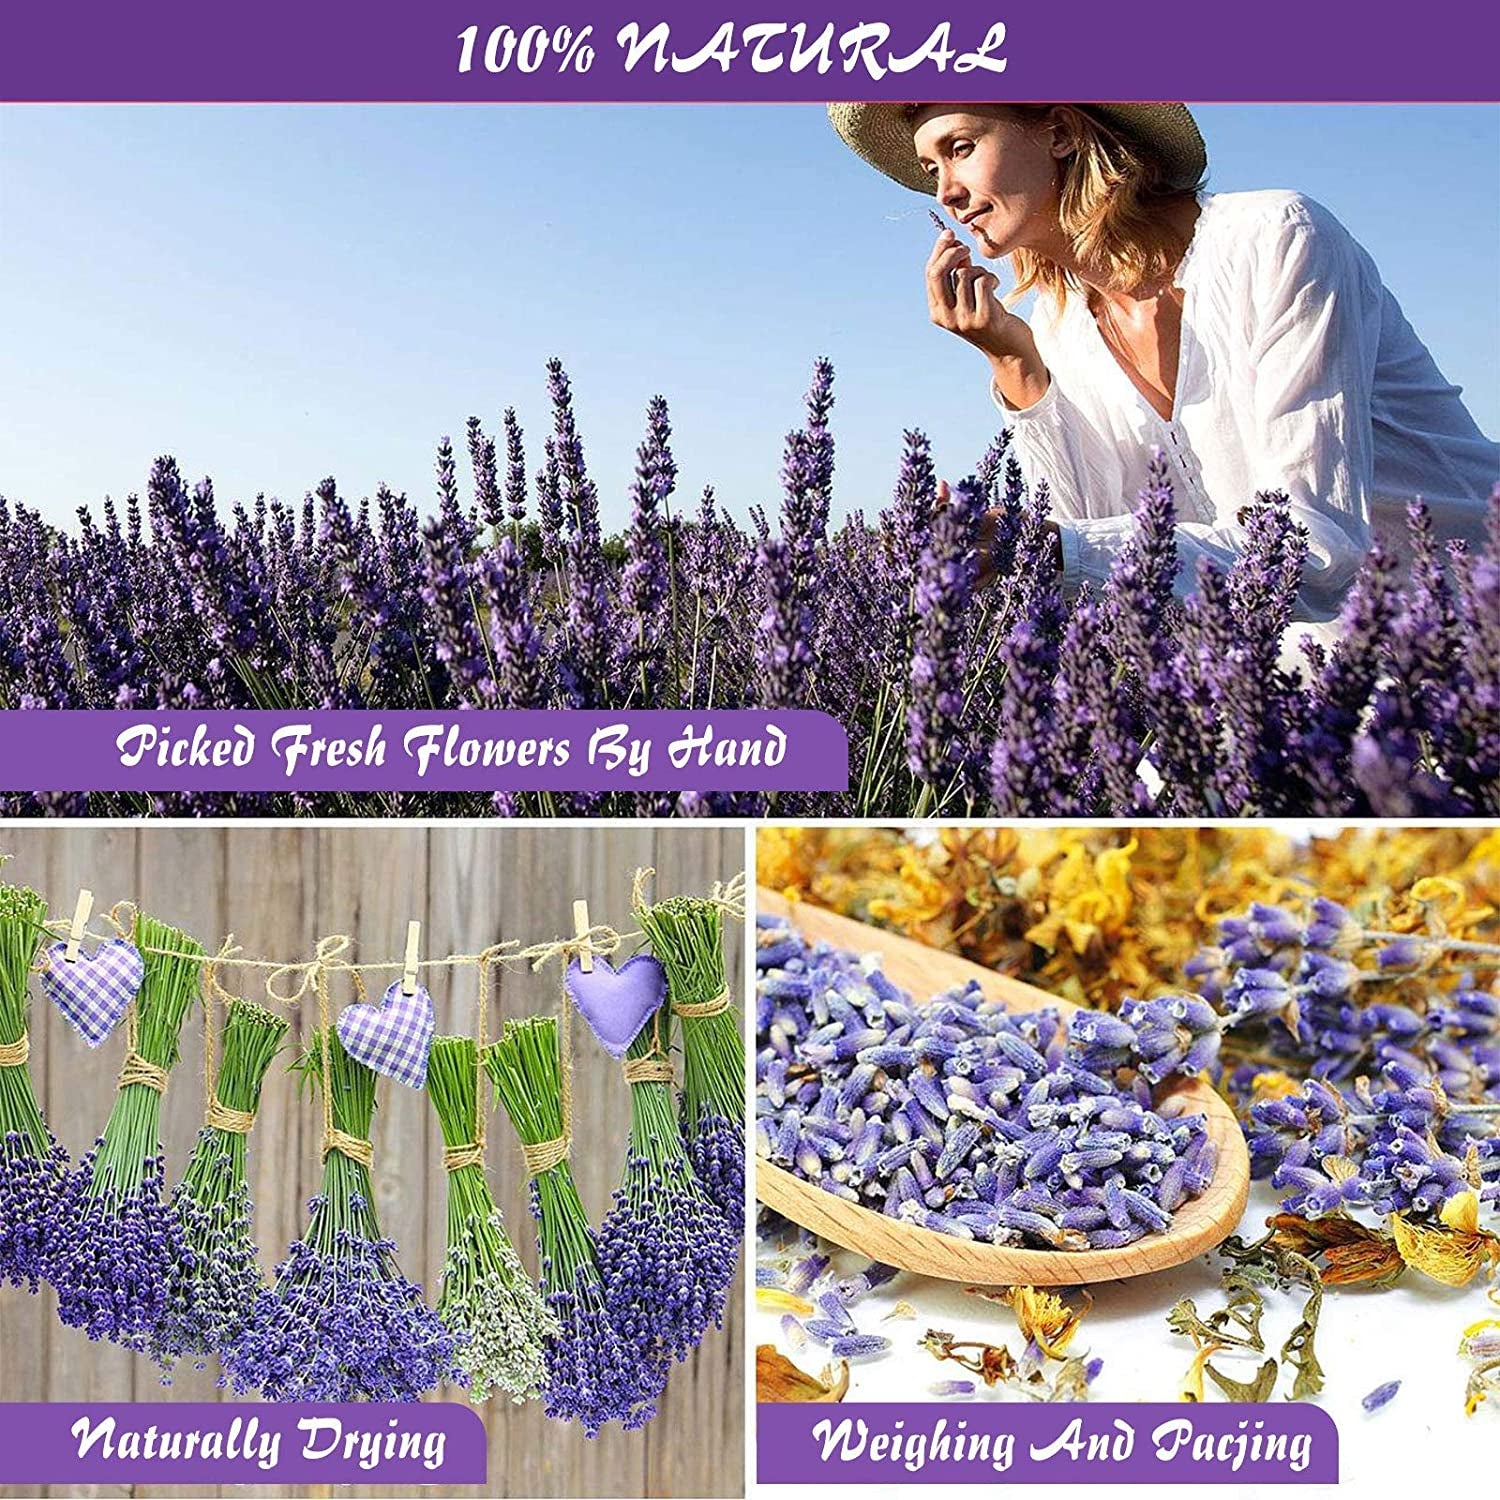 24 Bags Dried Flowers,100% Natural Dried Flowers Herbs Kit for Soap Making, DIY Candle Making,Bath - Include Rose Petals,Lavender,Don'T Forget Me,Lilium,Jasmine,Rosebudsand More